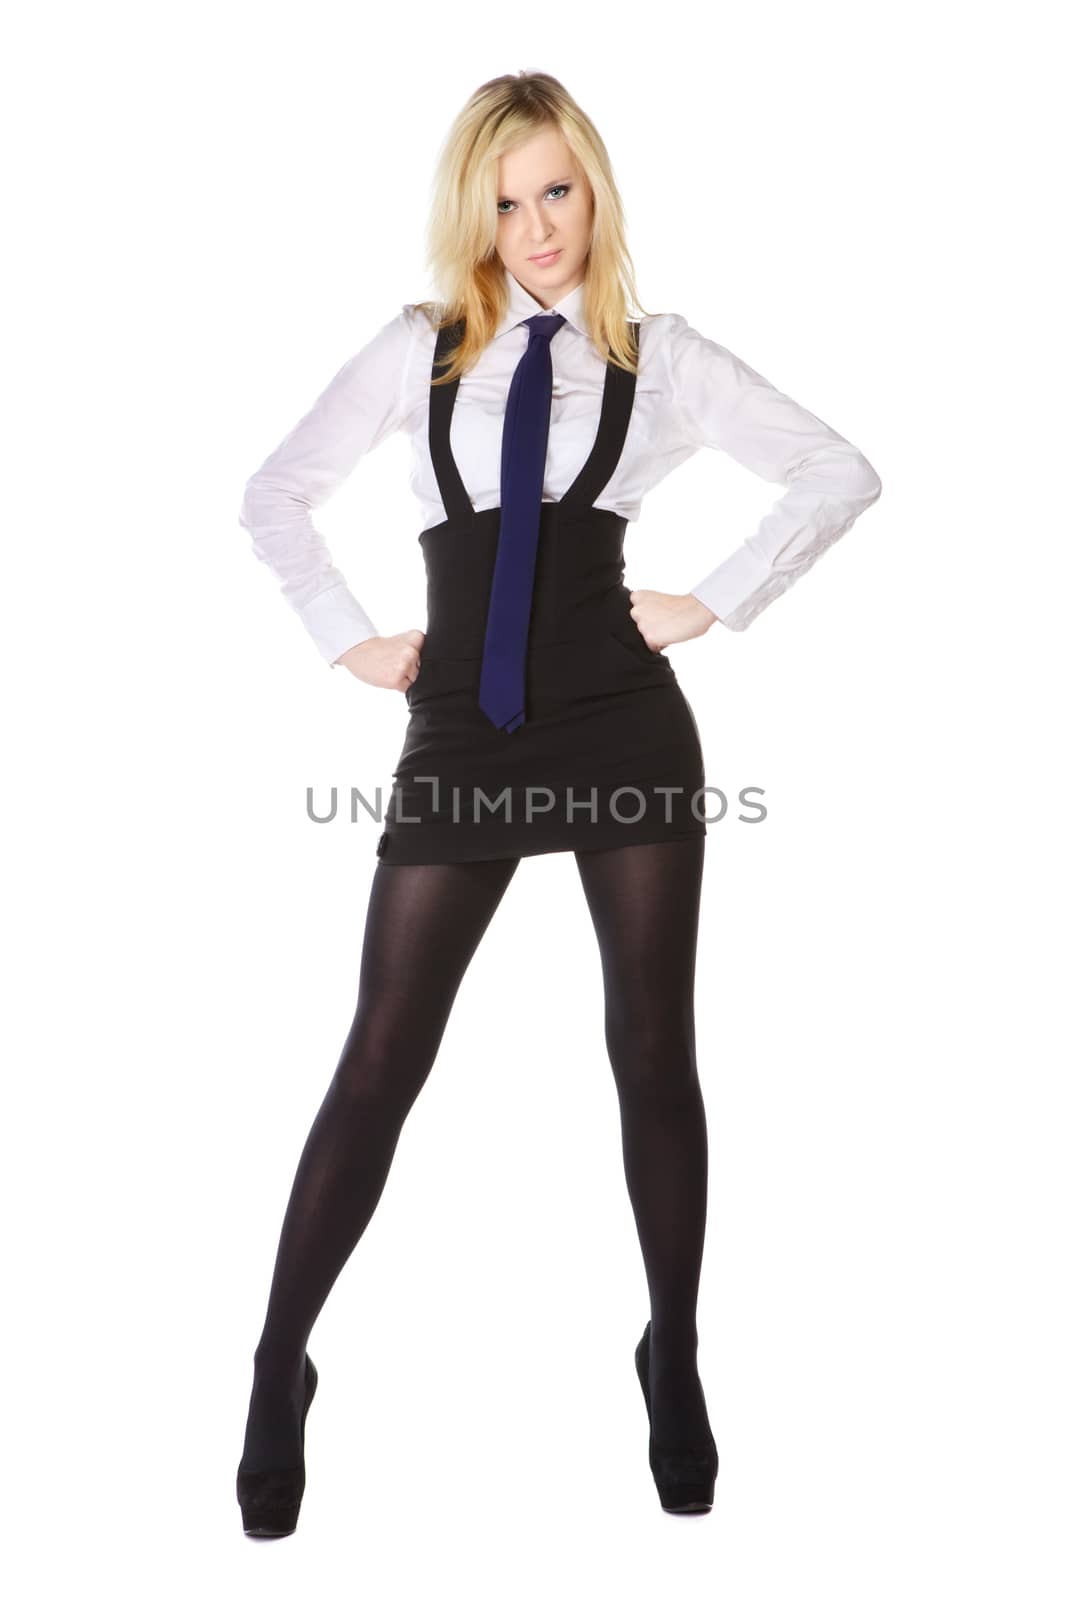 beautiful girl in school uniform, isolated on white